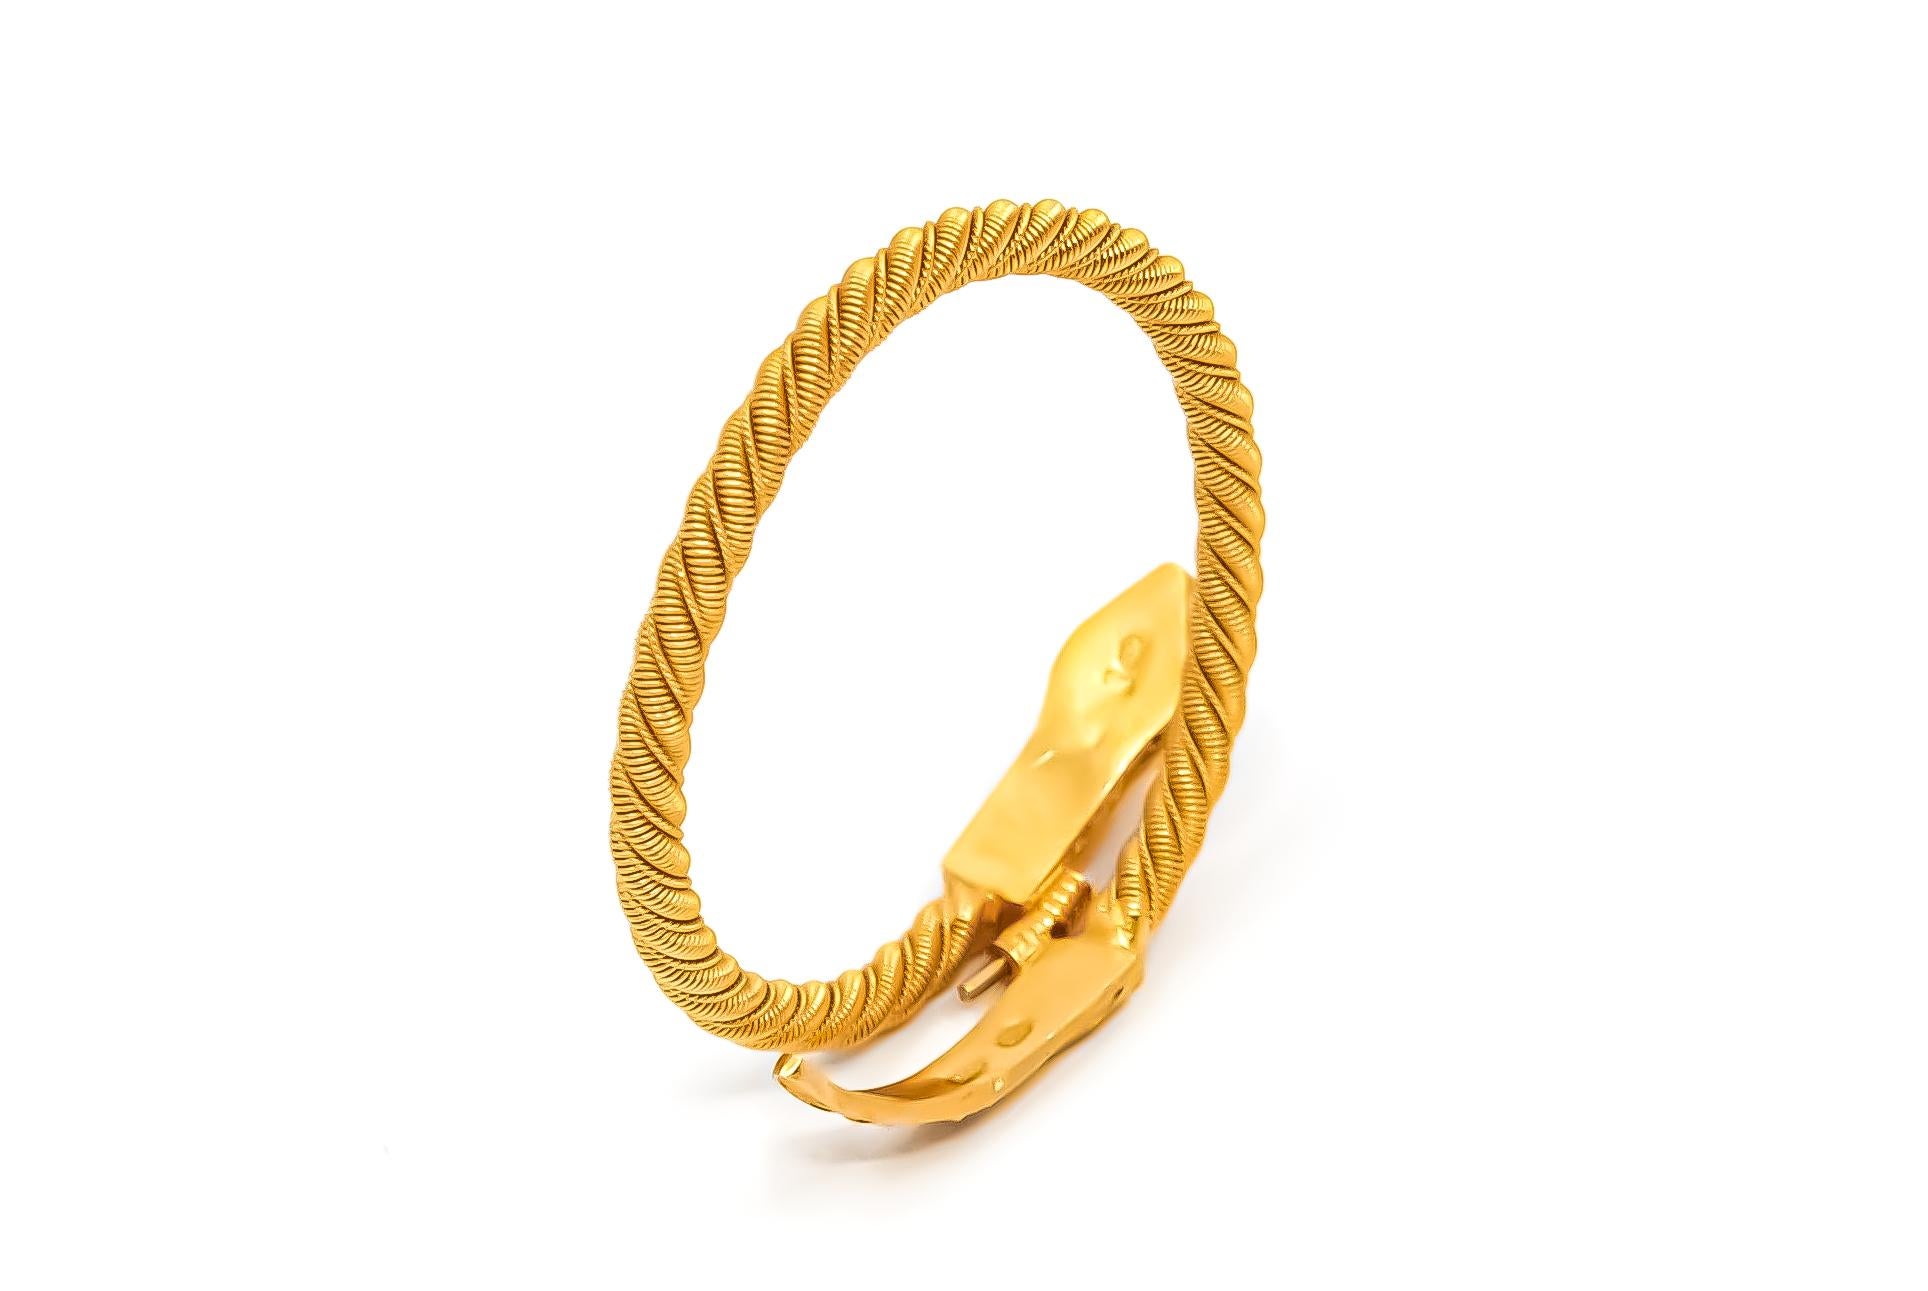 Vintage Serpenti 21kt Solid Gold Cuff Bracelet Dating Back to Early 1960s In Excellent Condition For Sale In Dubai, AE